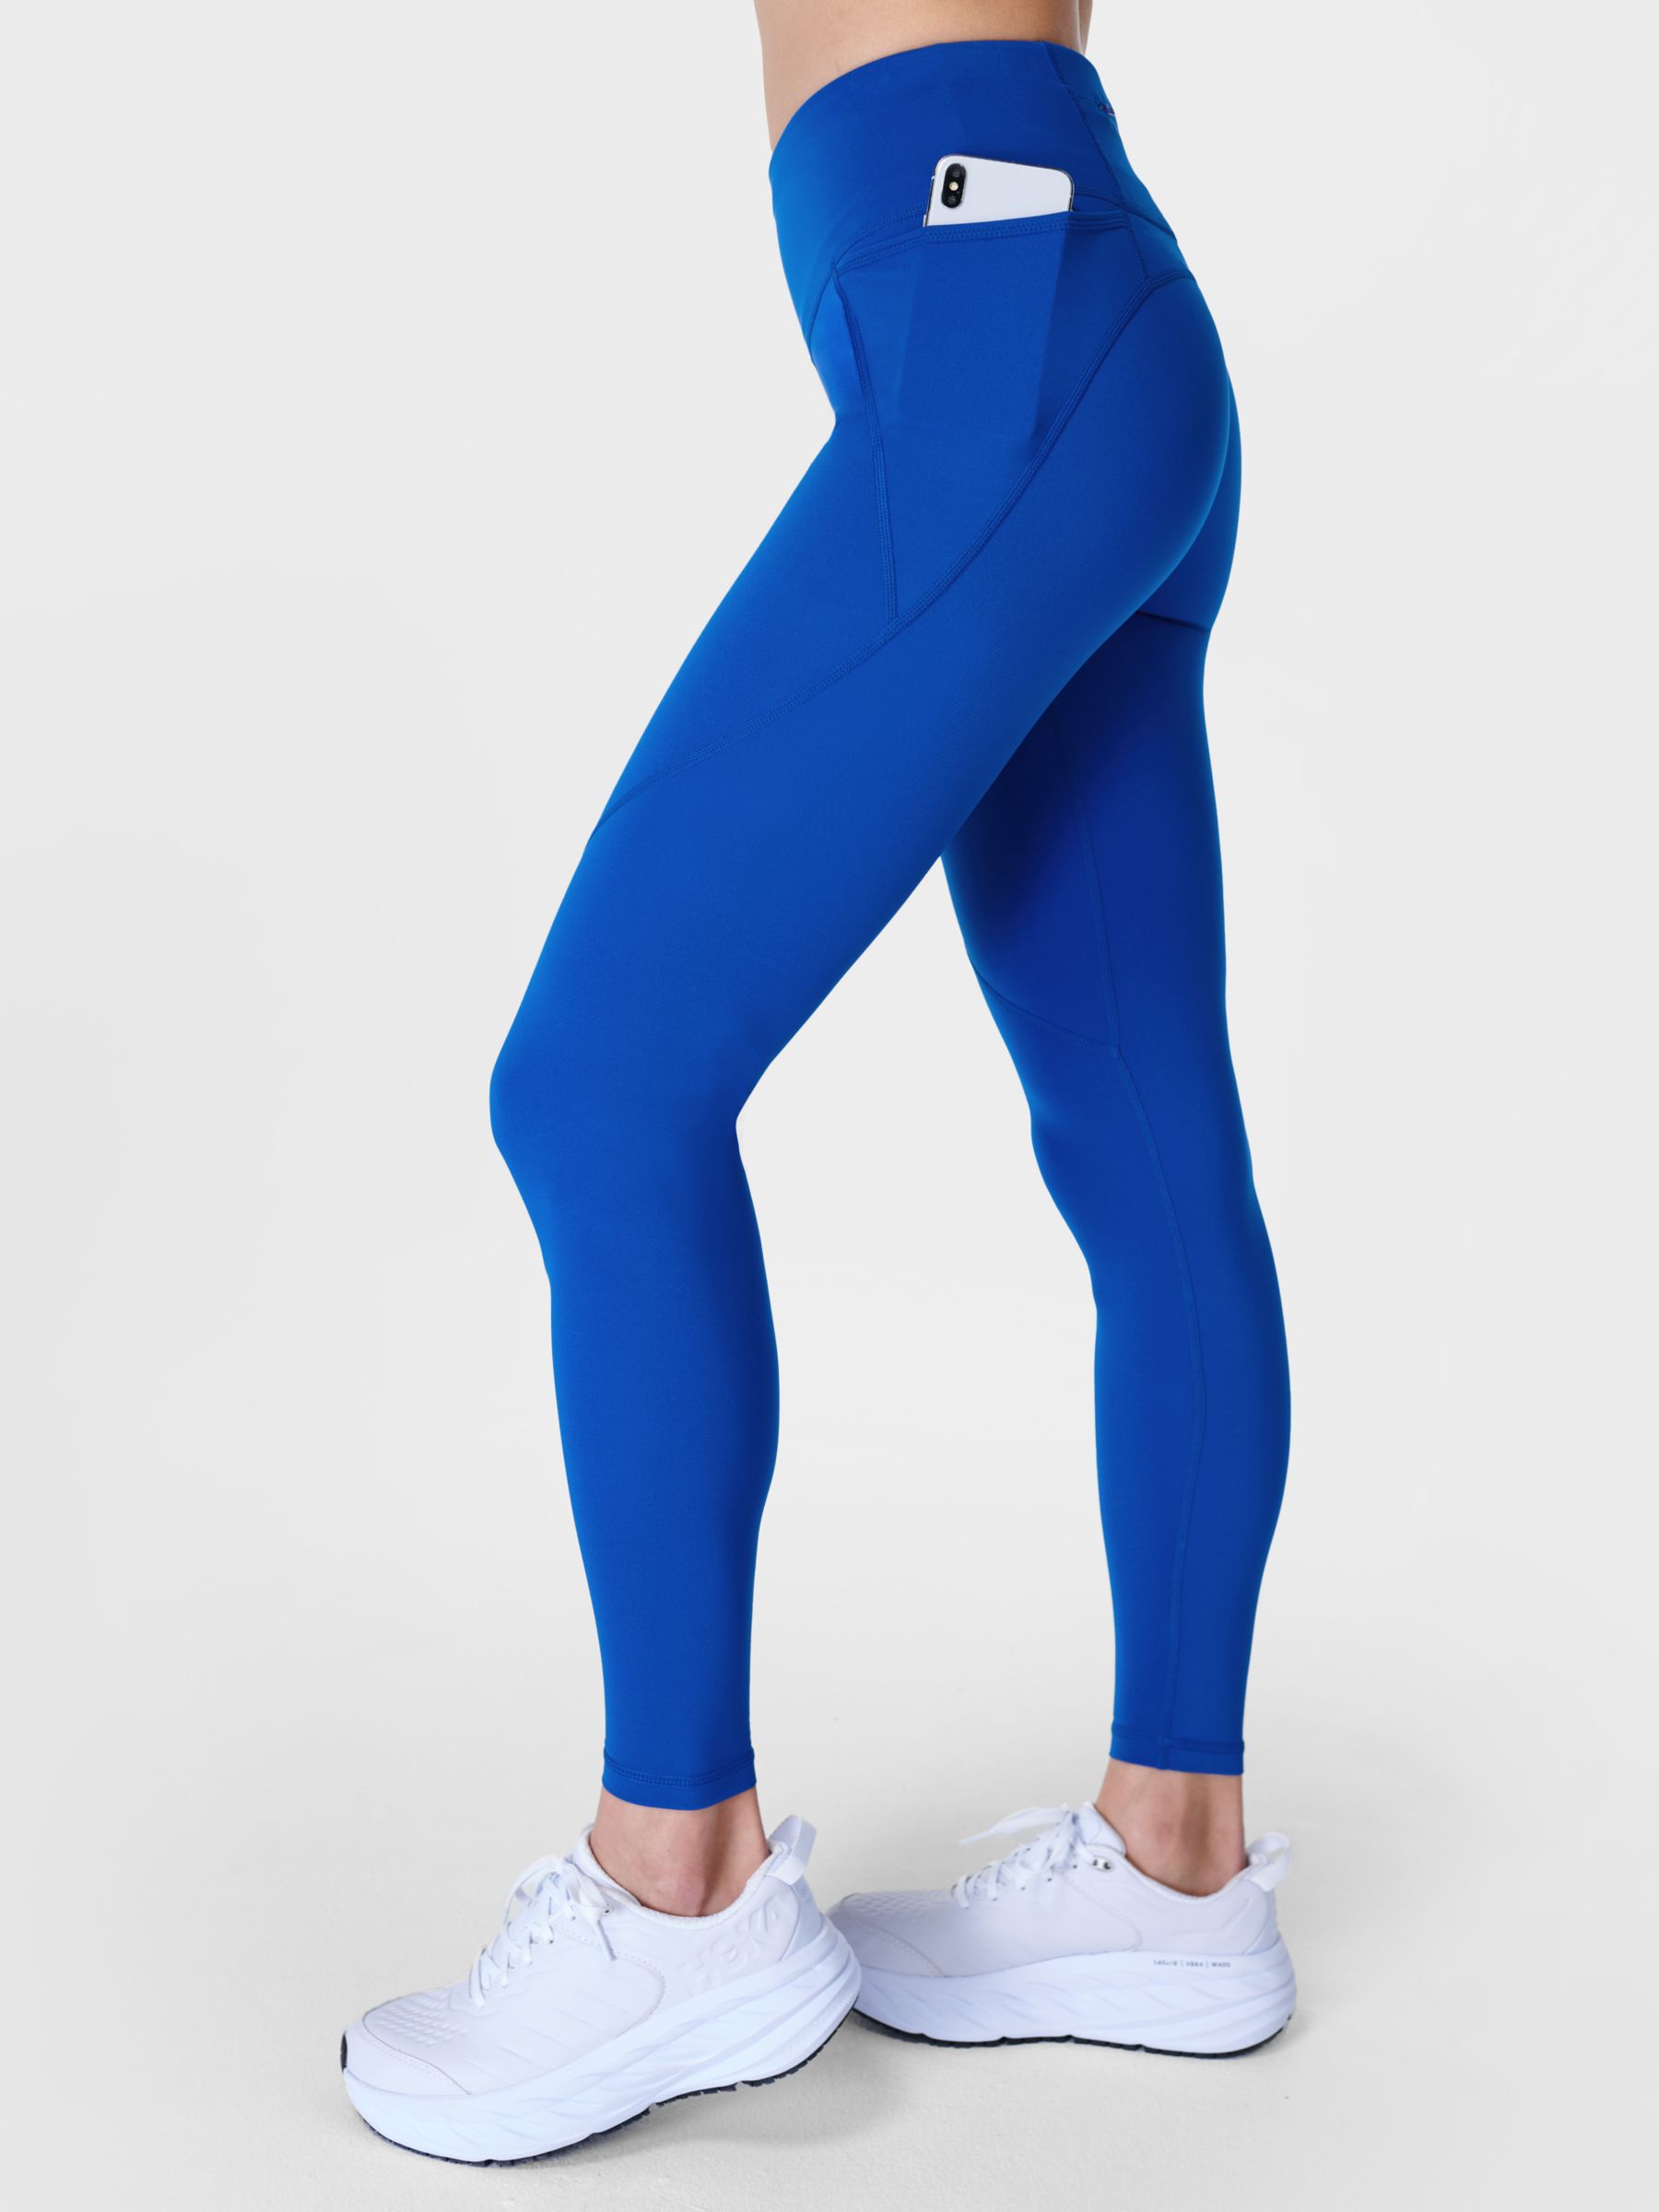 SWEATY BETTY All Day Embossed Leggings in Blue Textured